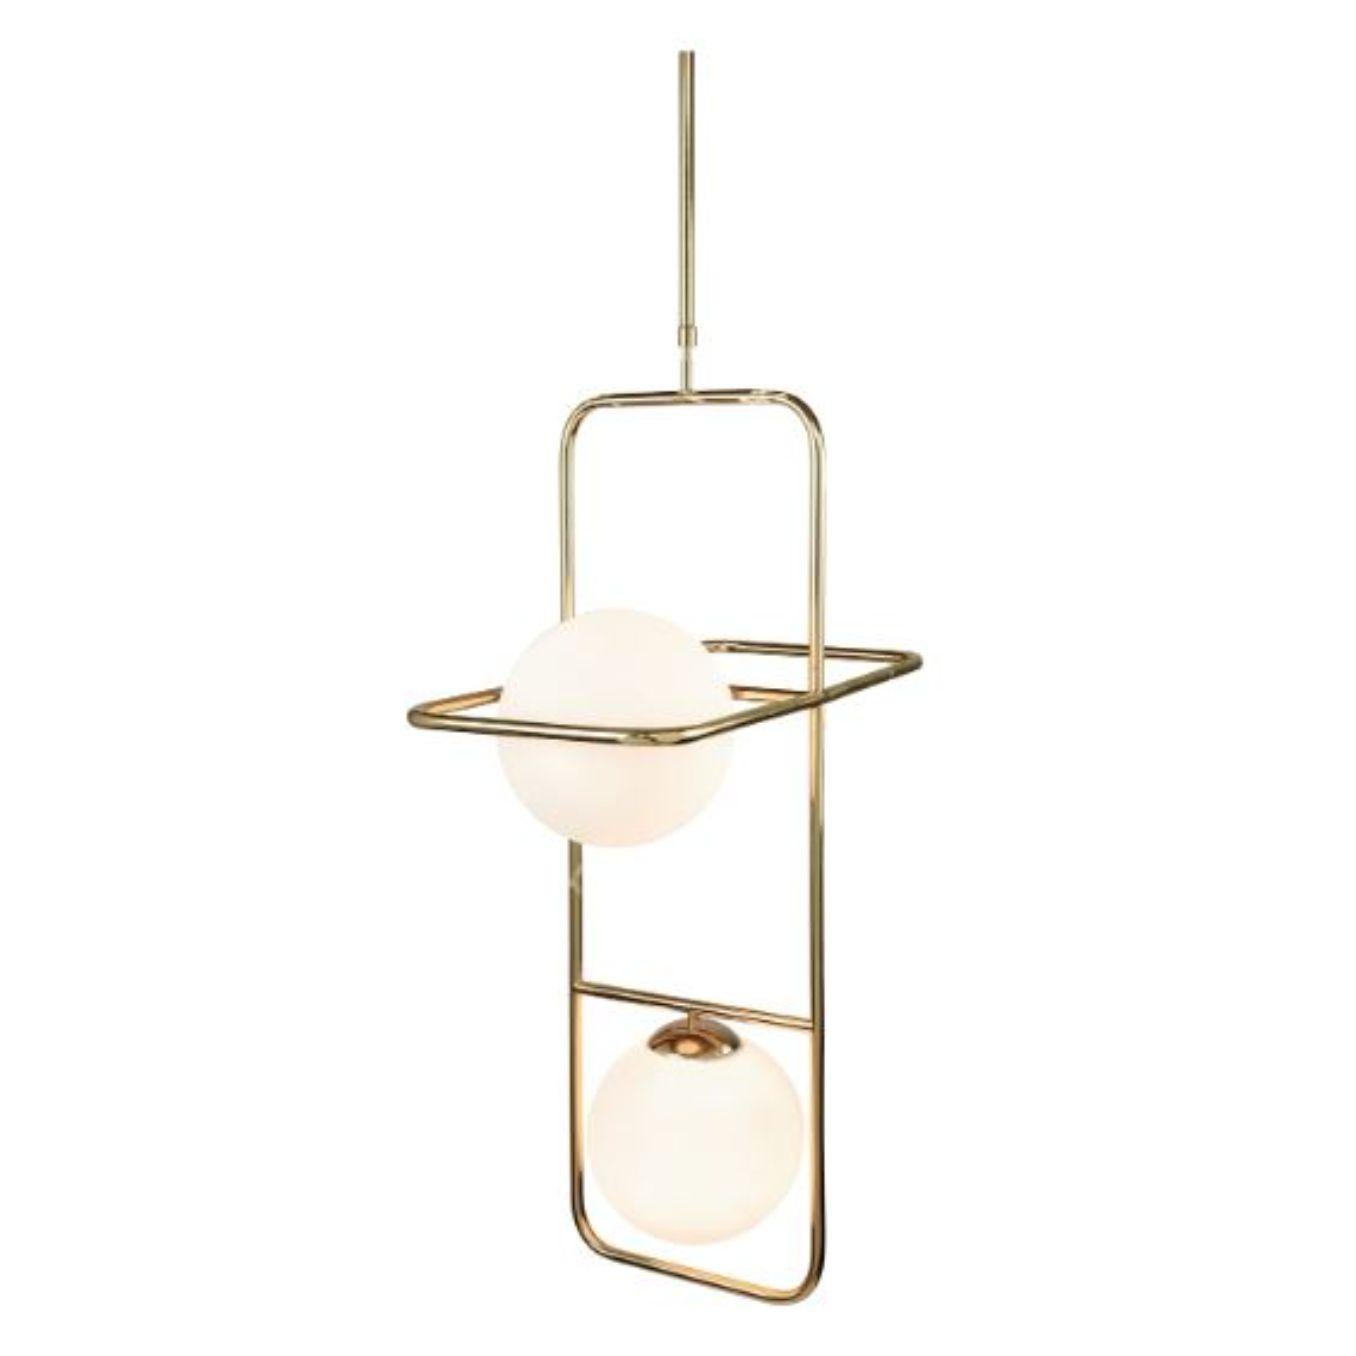 Brass Link II Suspension Lamp by Dooq
Dimensions: W 64 x D 33 x H 100 cm
Materials: lacquered metal, polished or brushed metal, brass. 
Also available in different colours and materials.

Information:
230V/50Hz
2 x max. G9
5W LED

120V/60Hz
2 x max.